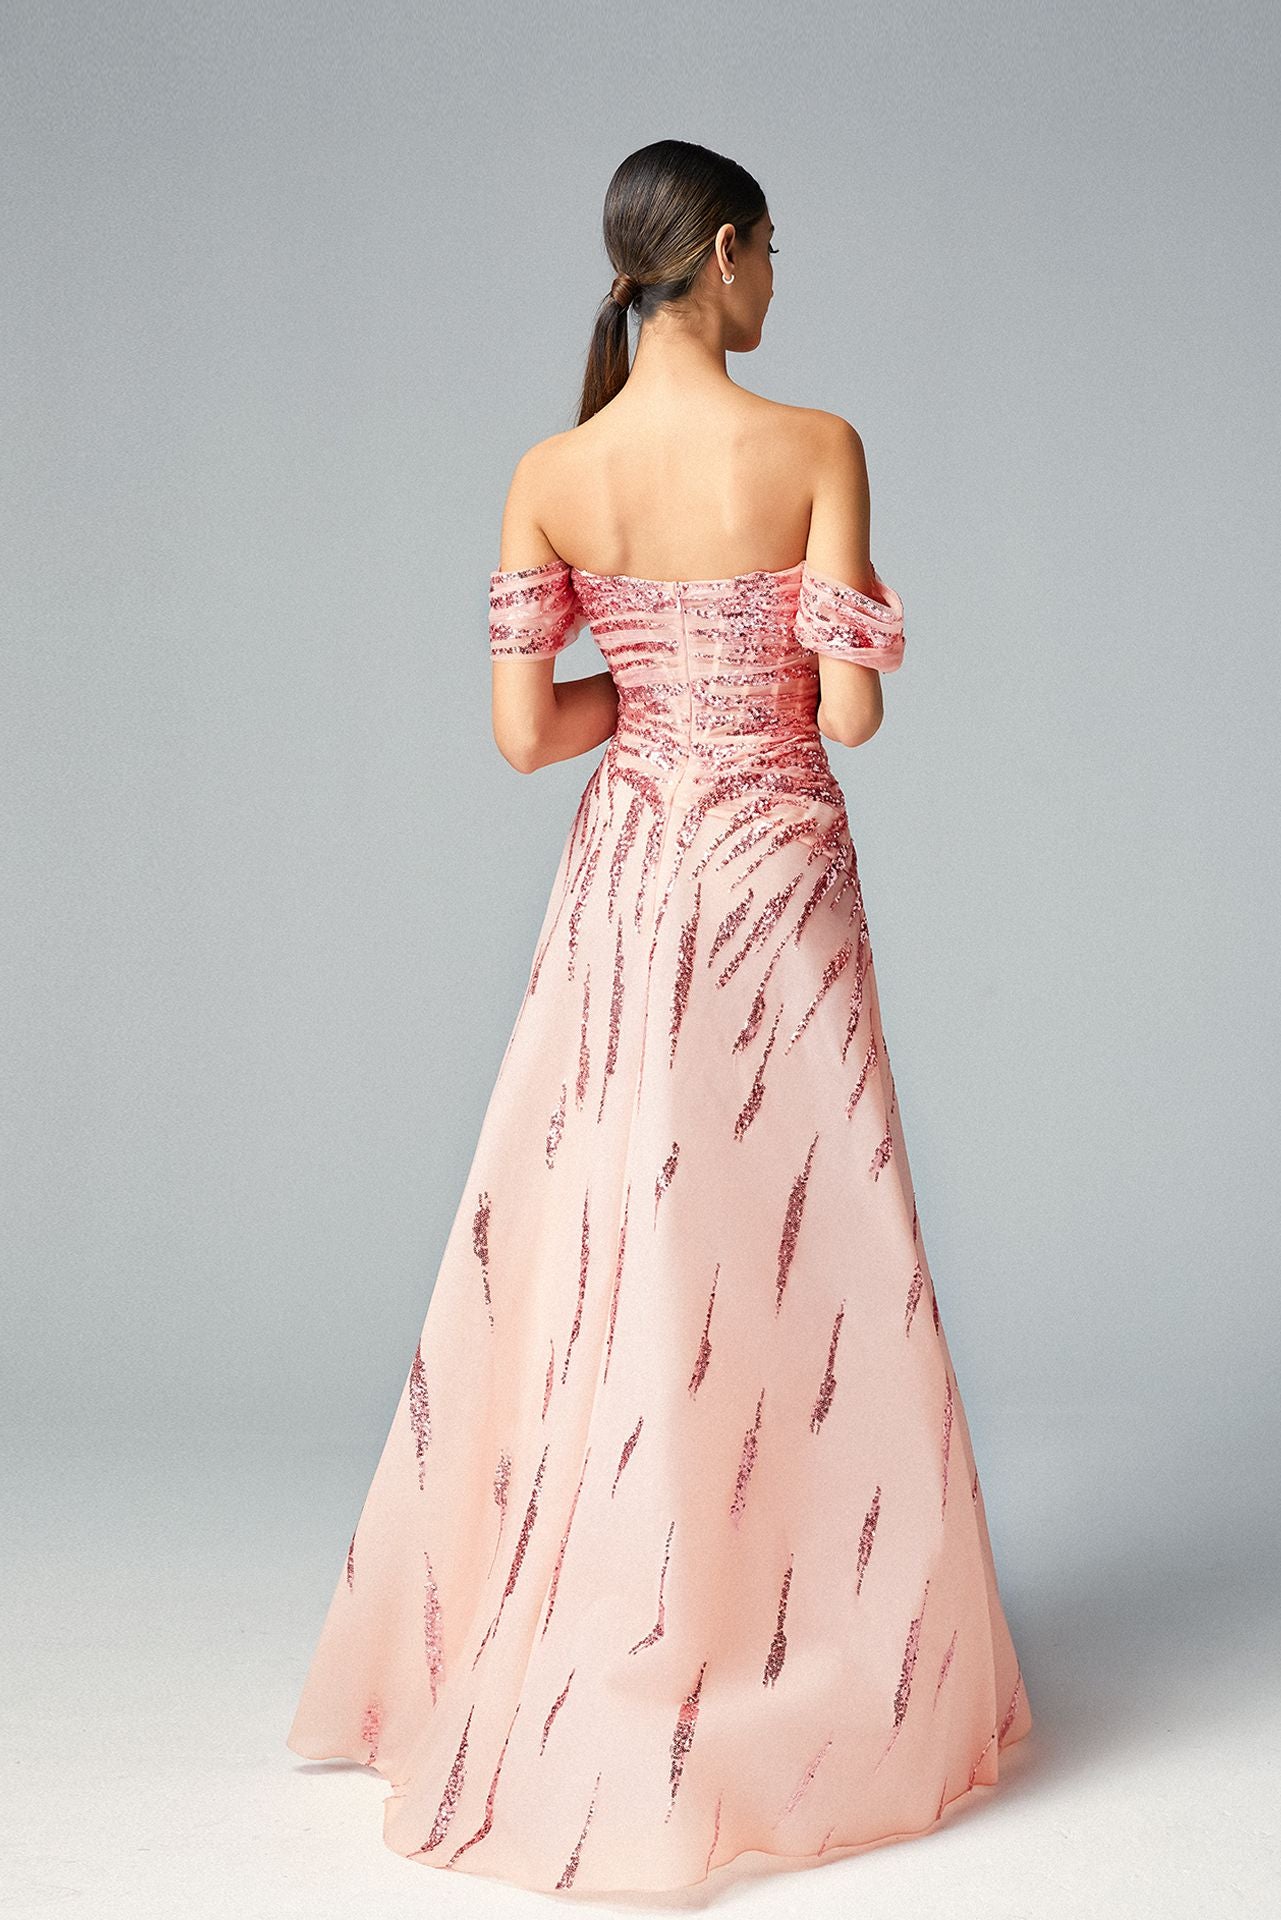 Off-shoulder Sweetheart Crepe Pink Ball Gown Tulle with Foliage Sequined Pattern